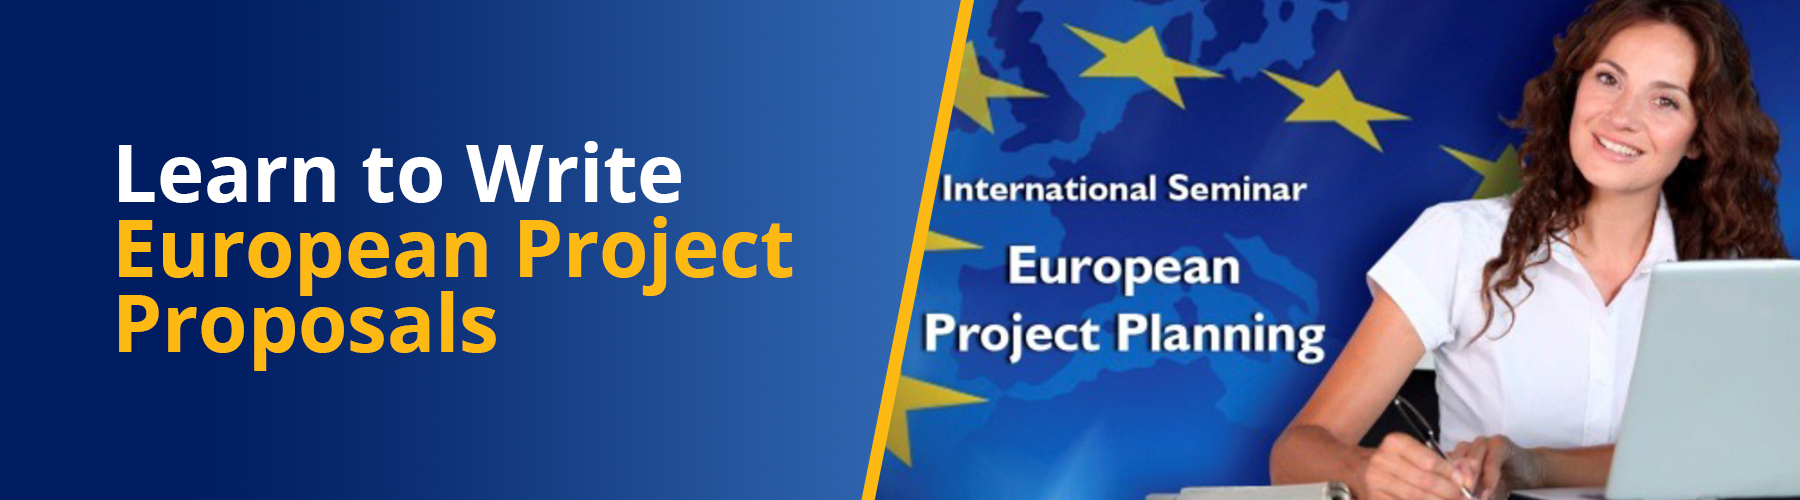 Learn to Write European Project Proposals